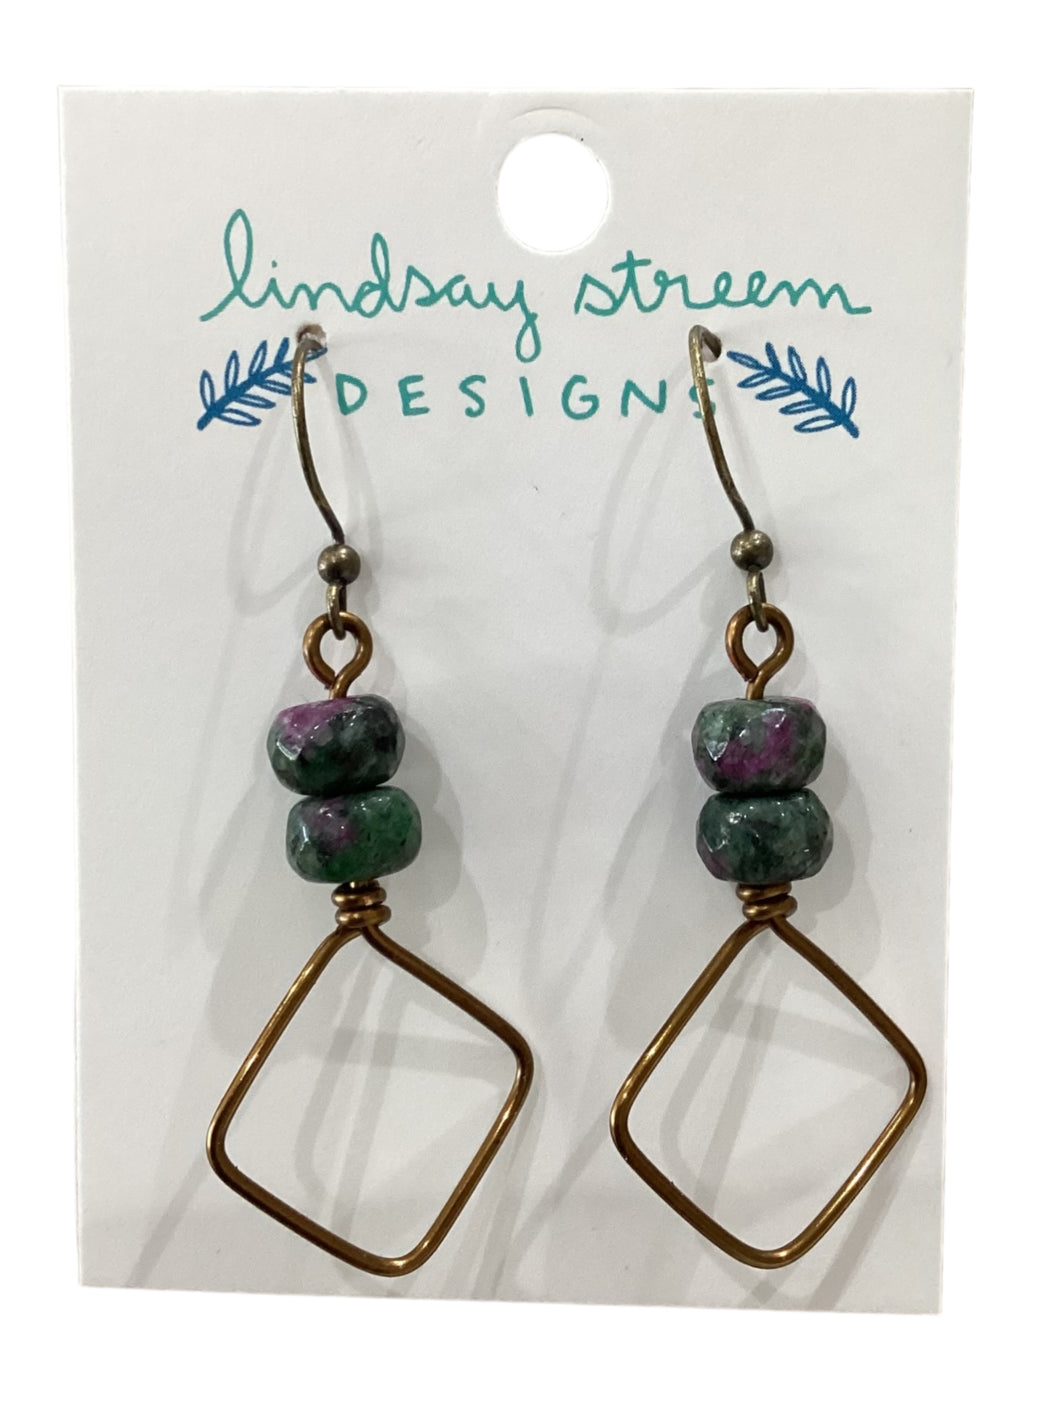 Square Hoops Earrings with Ruby Zoisite